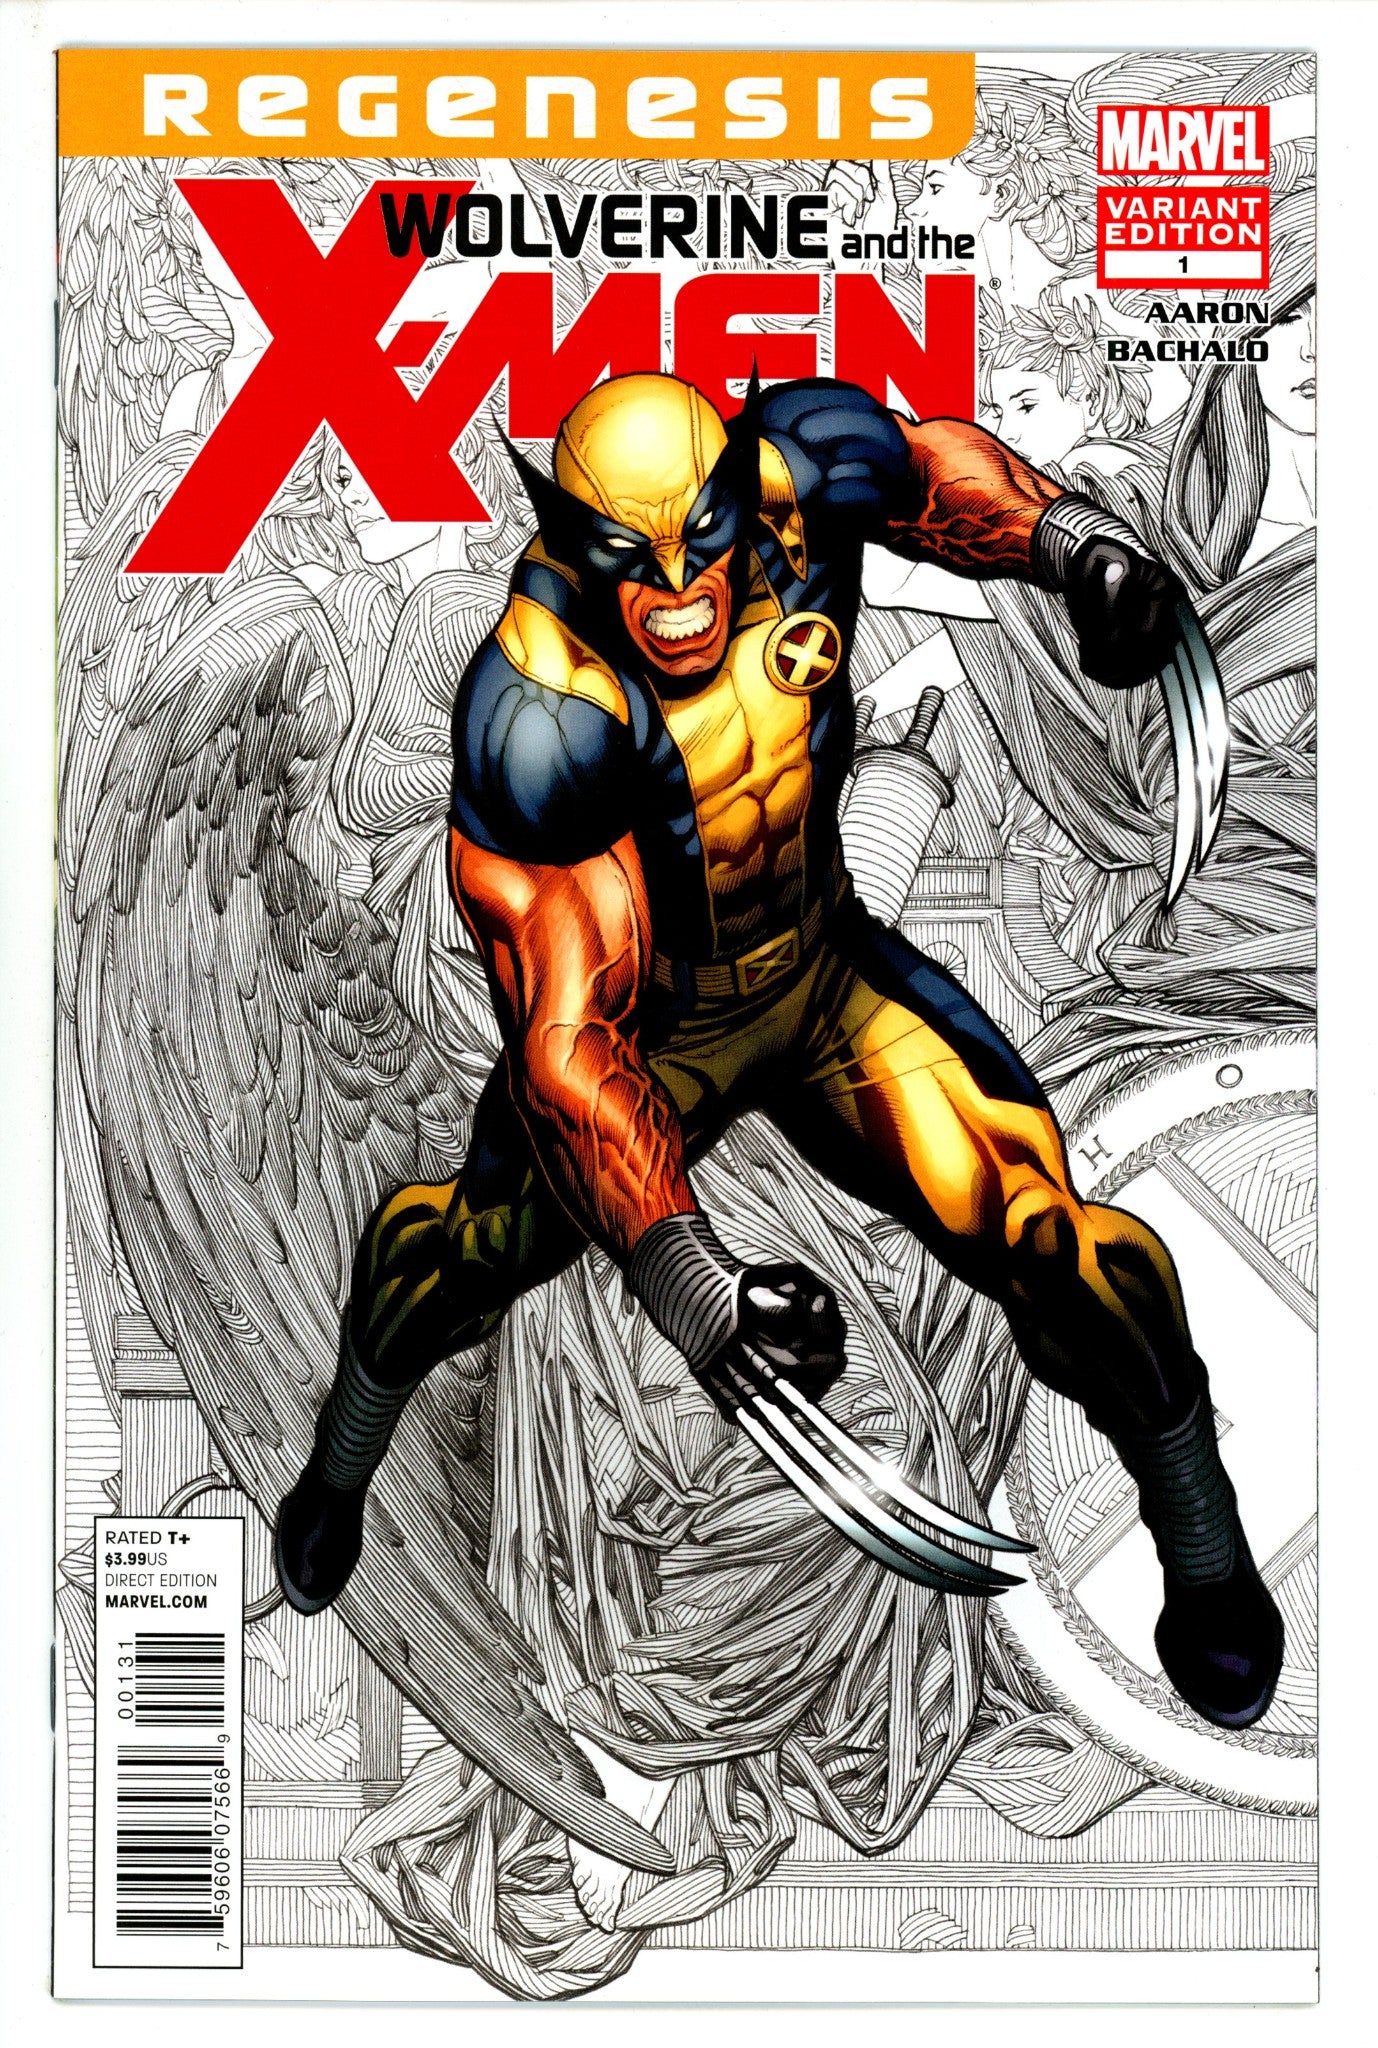 Wolverine & the X-Men Vol 1 1 VF+ (8.5) (2011) Cho Incentive Variant 